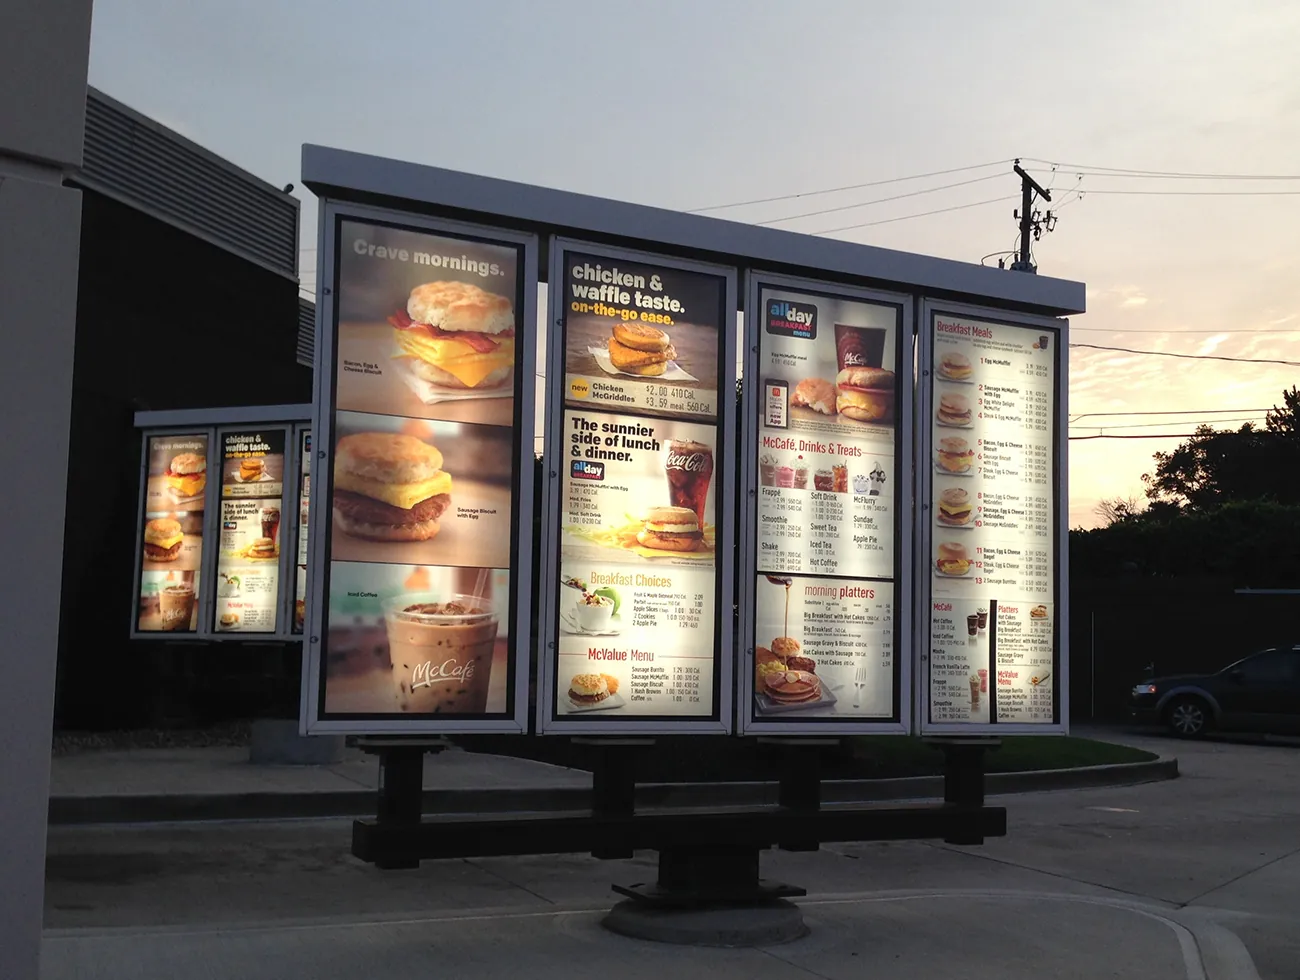 A photo shows a McDonald’s drive-through menu put outside the restaurant. The pages of the menu are shown placed in a large lit-up glass display case.